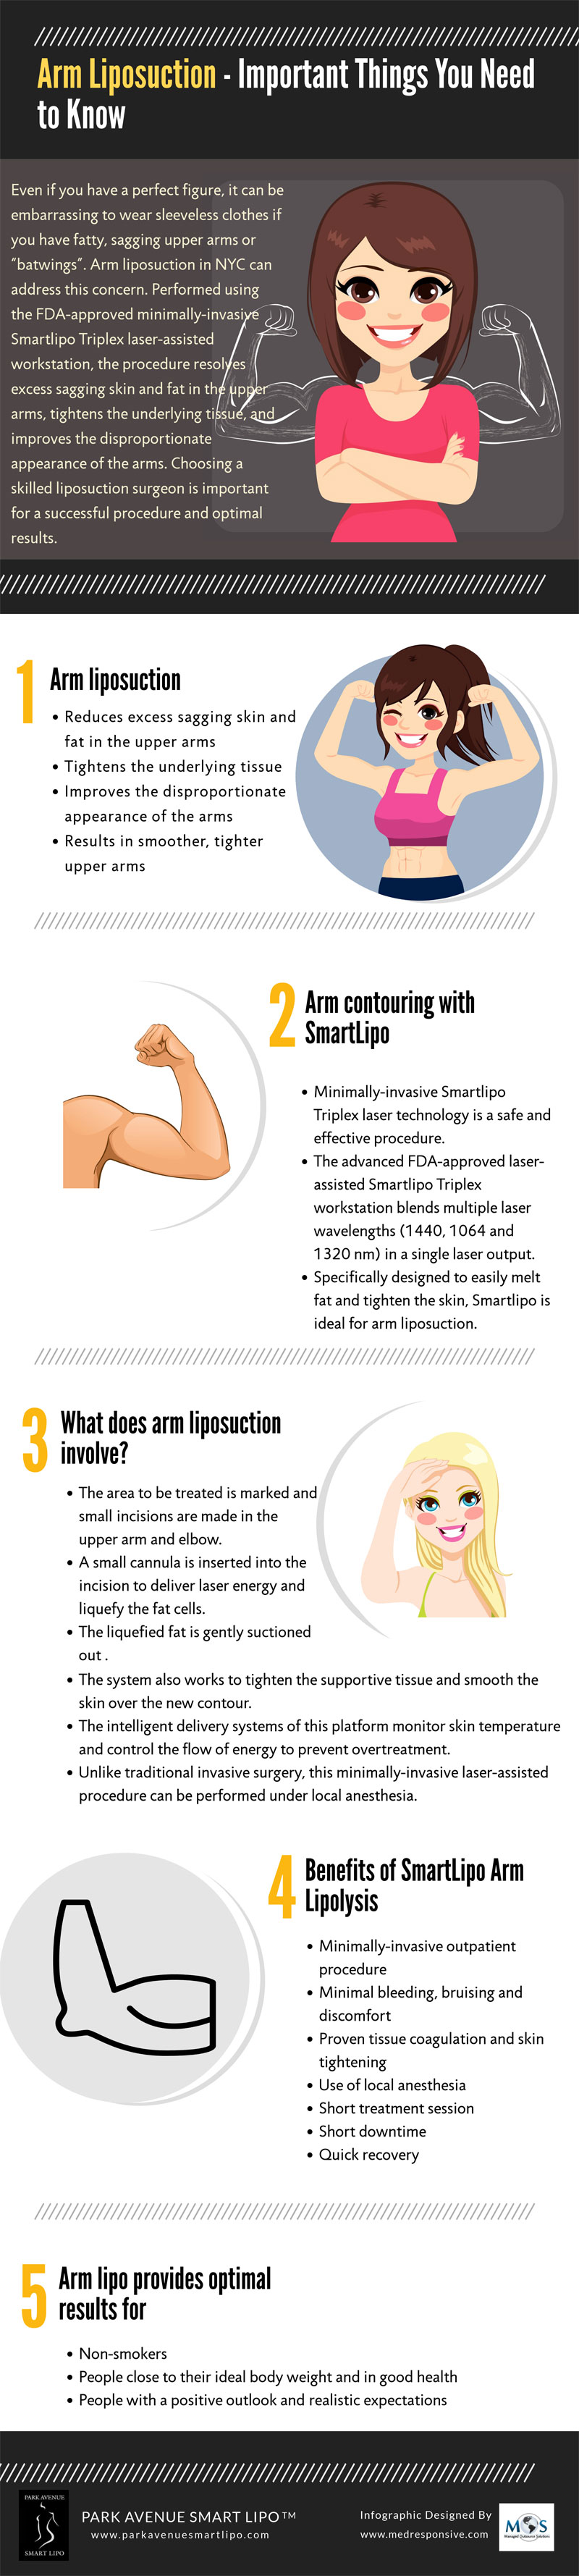 Arm Liposuction - Important Things You Need to Know